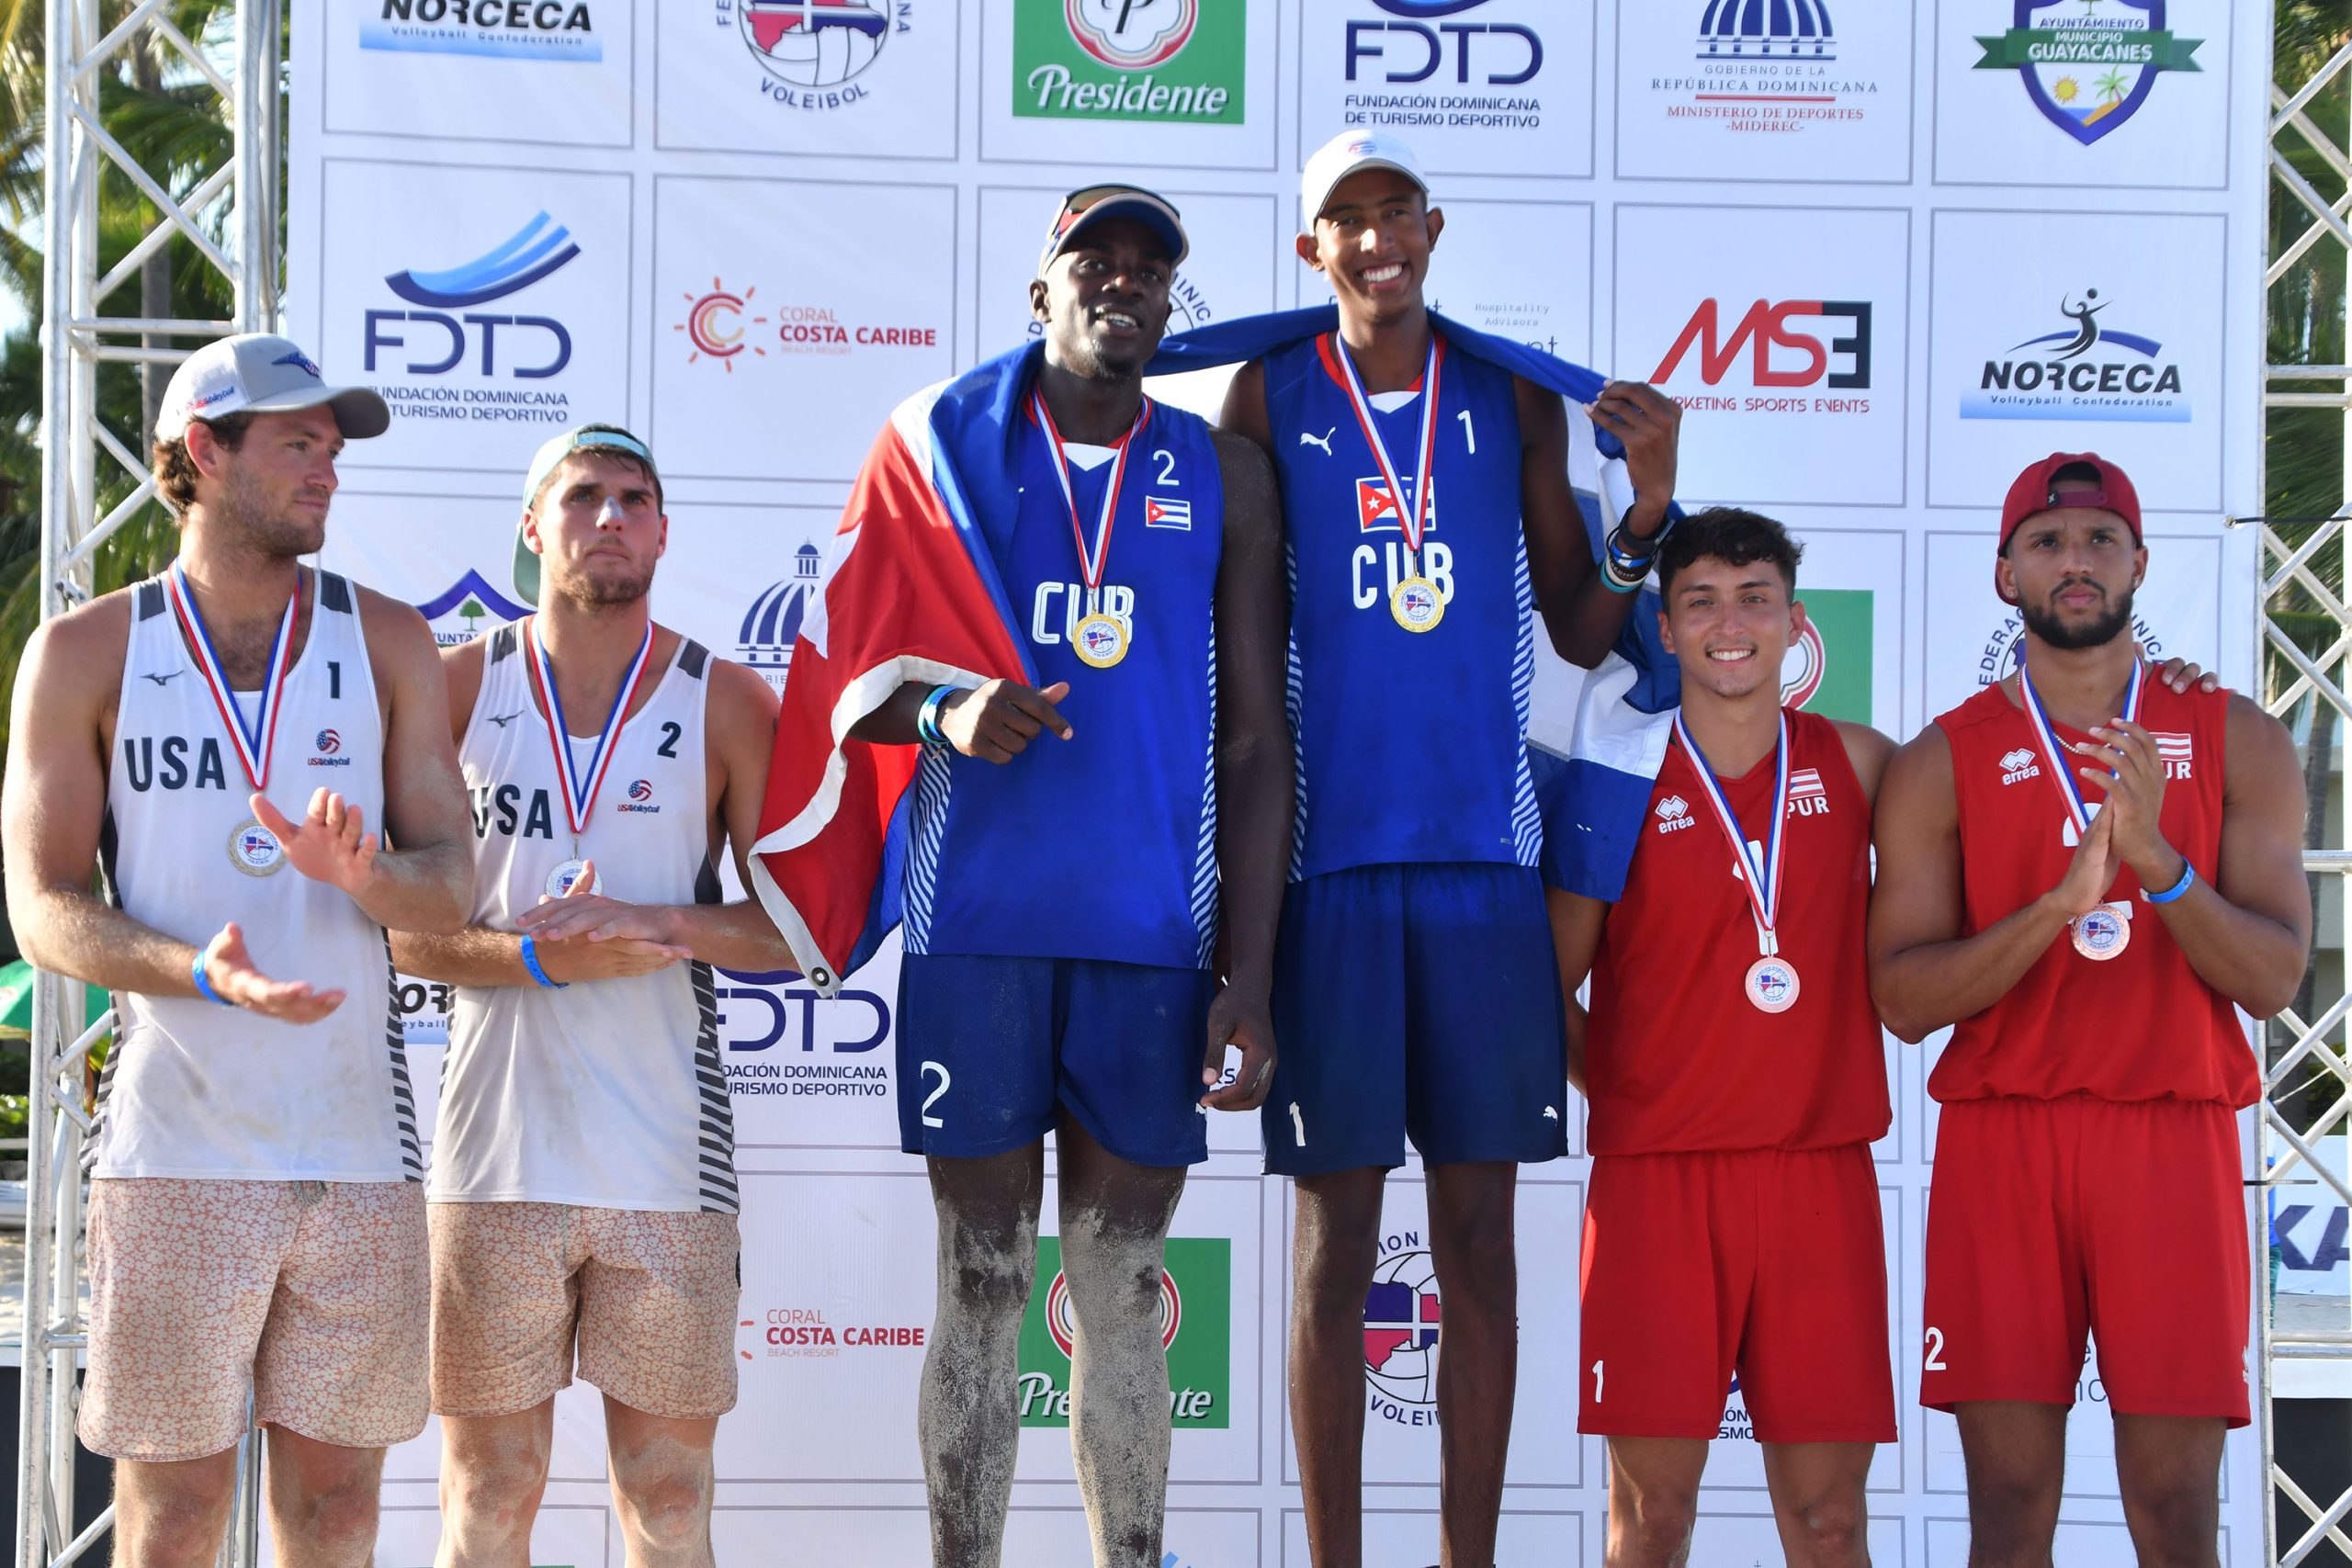 Cuba Men Win Gold in 3rd stage of the NORCECA Beach Tour in Juan Dolio